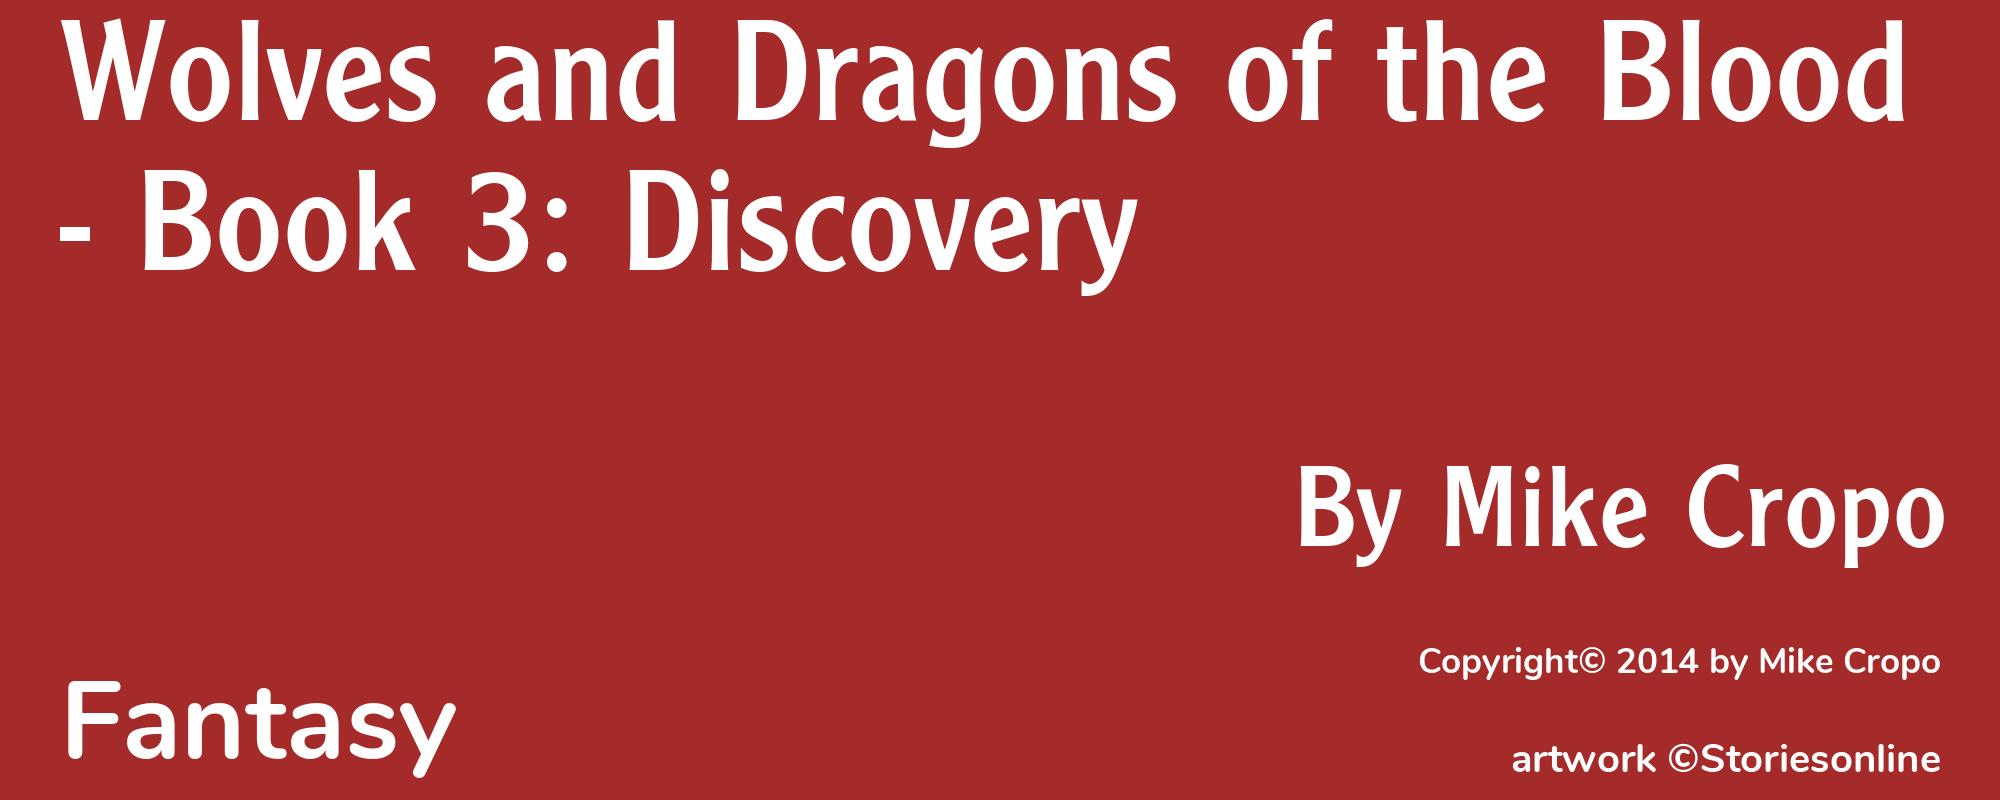 Wolves and Dragons of the Blood - Book 3: Discovery - Cover